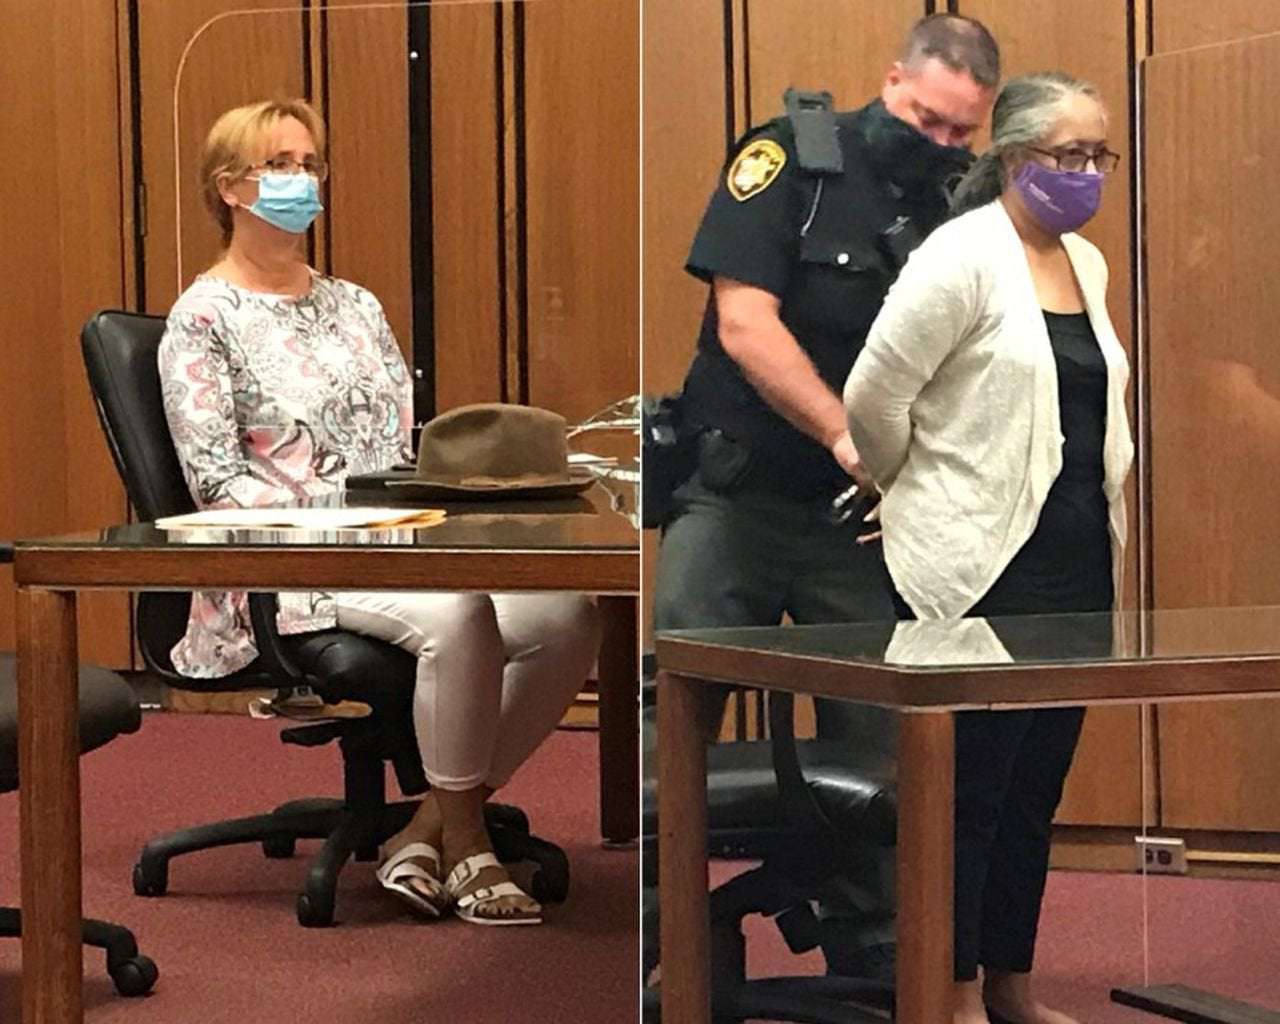 image for White woman who stole $250K gets probation, while Black woman who stole $40K goes to jail. Disparate sentences spark calls for reform